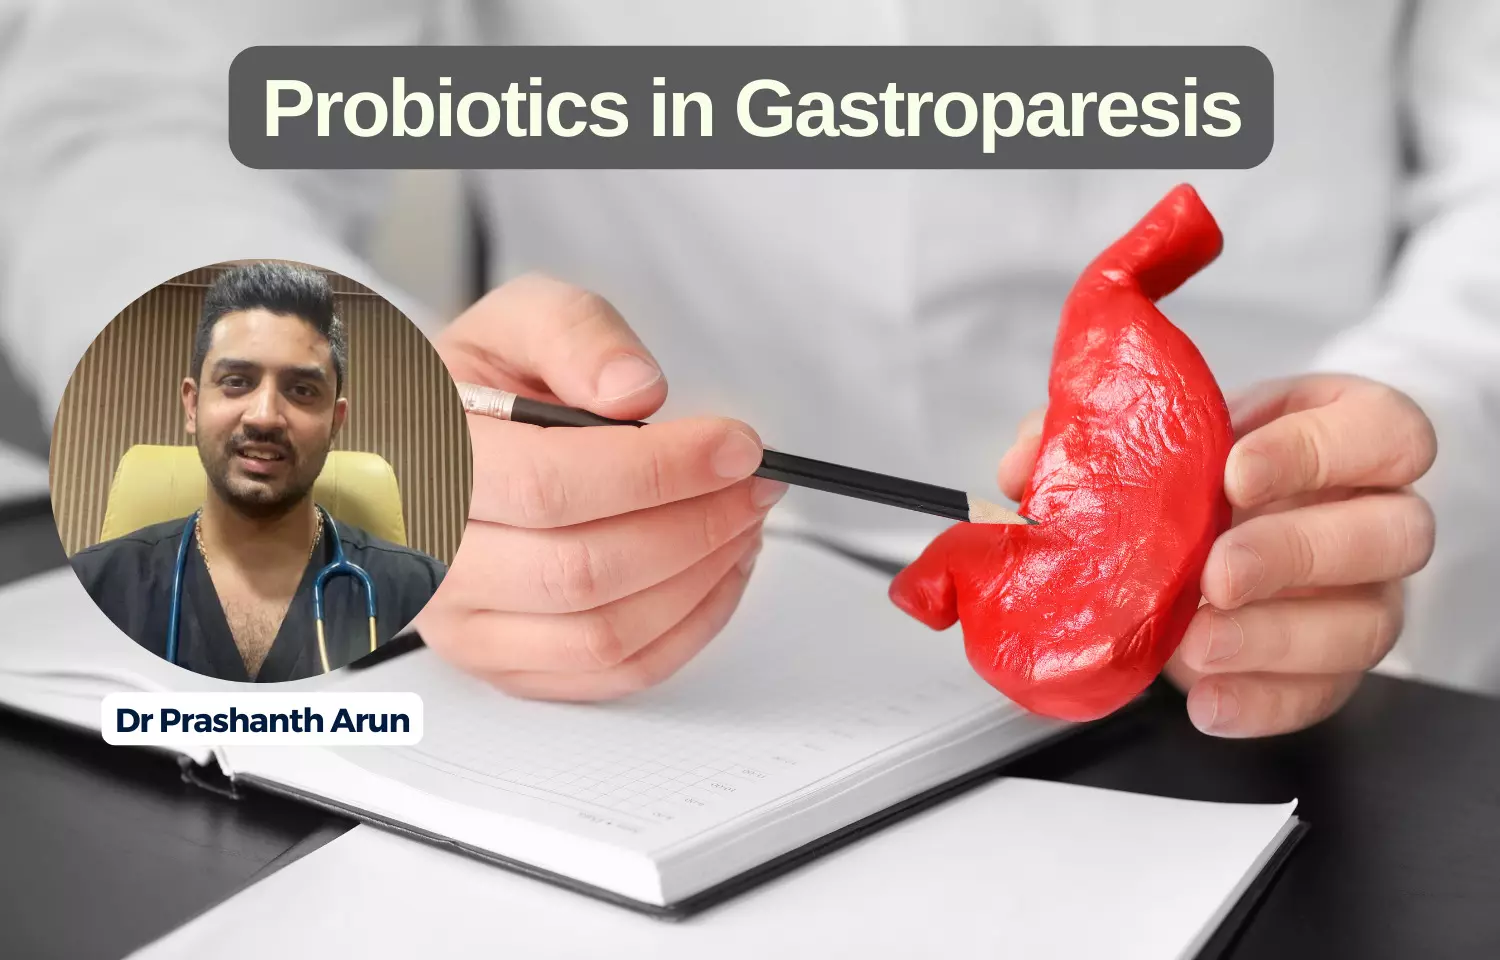 Treatment challenges in managing Gastroparesis related to PPI Use: Analyzing scope of Probiotics